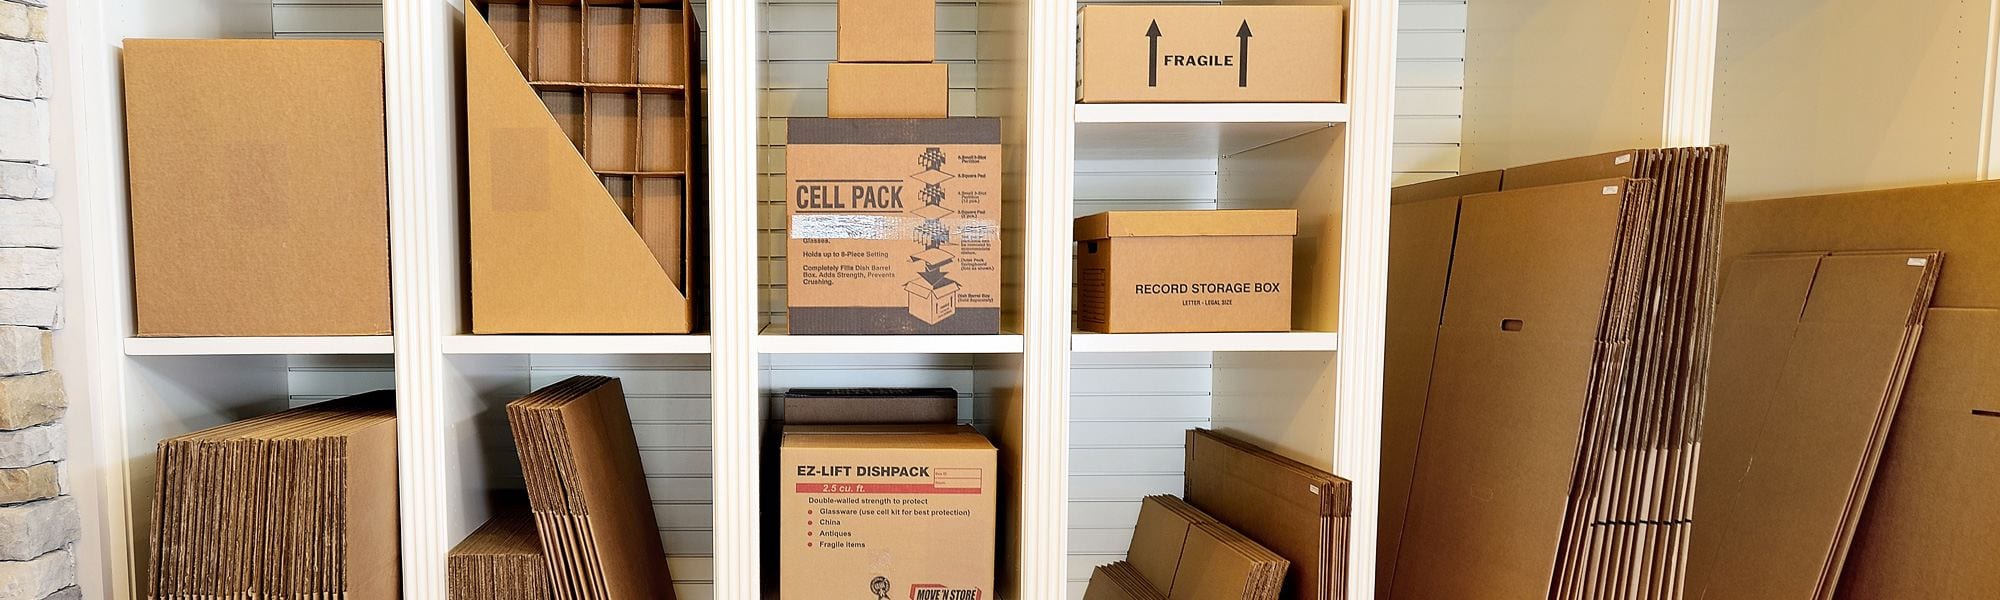 image of merchandise display boxes moving packing storage shipping